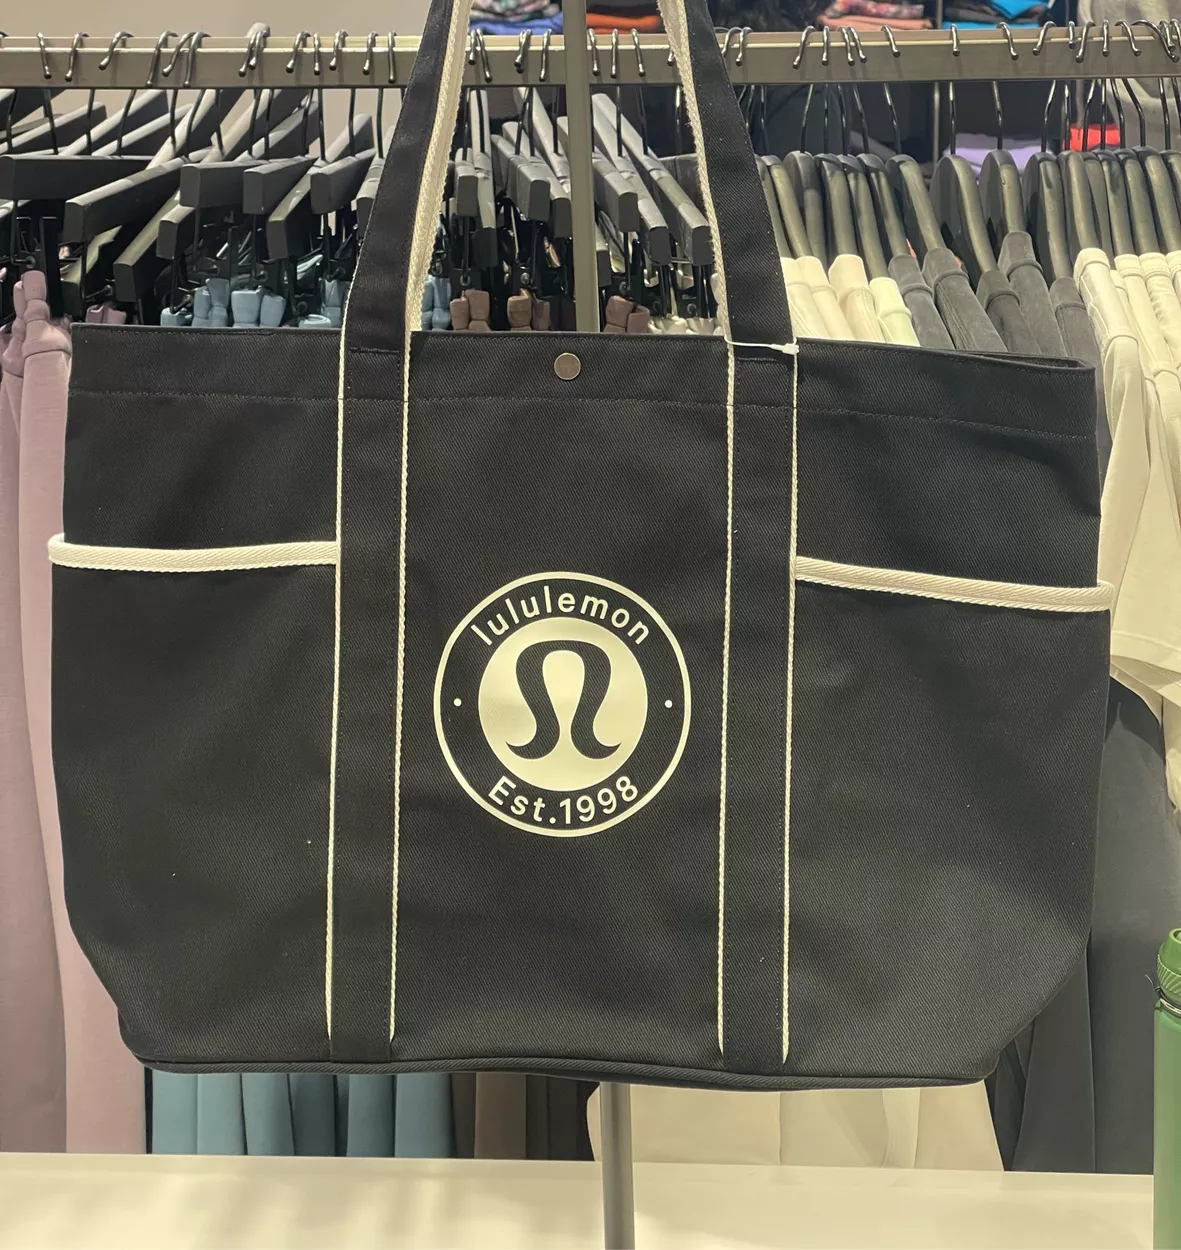 L.L.Bean and Lands' End Tote Bags Are Going Viral on TikTok